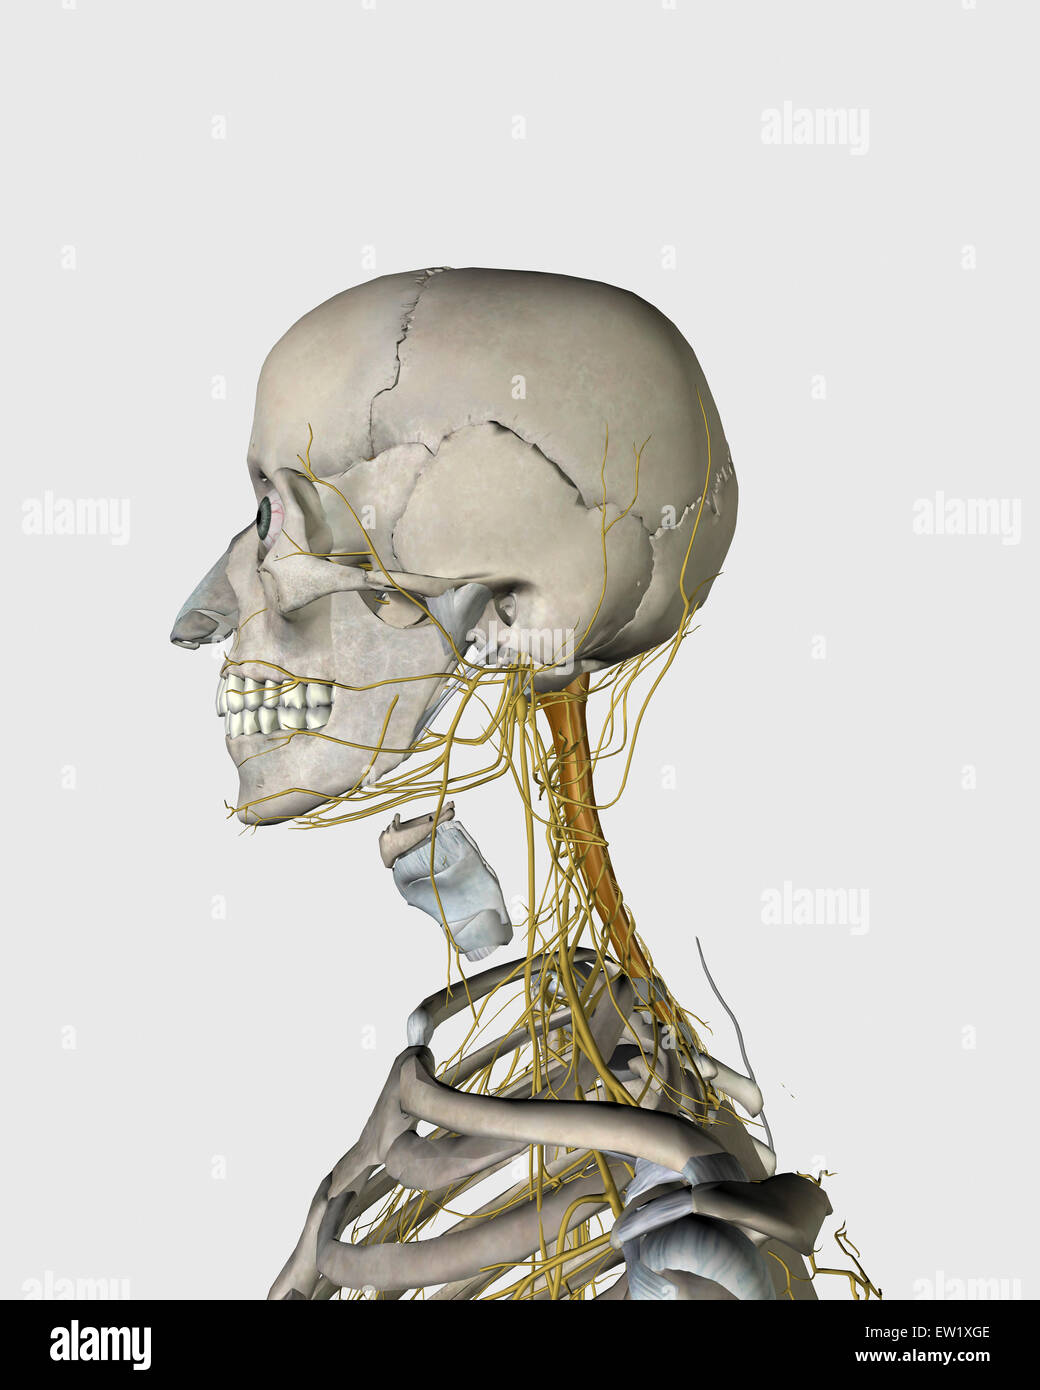 Medical illustration showing thyroid cartilage and nerves around human neck and head area. Stock Photo